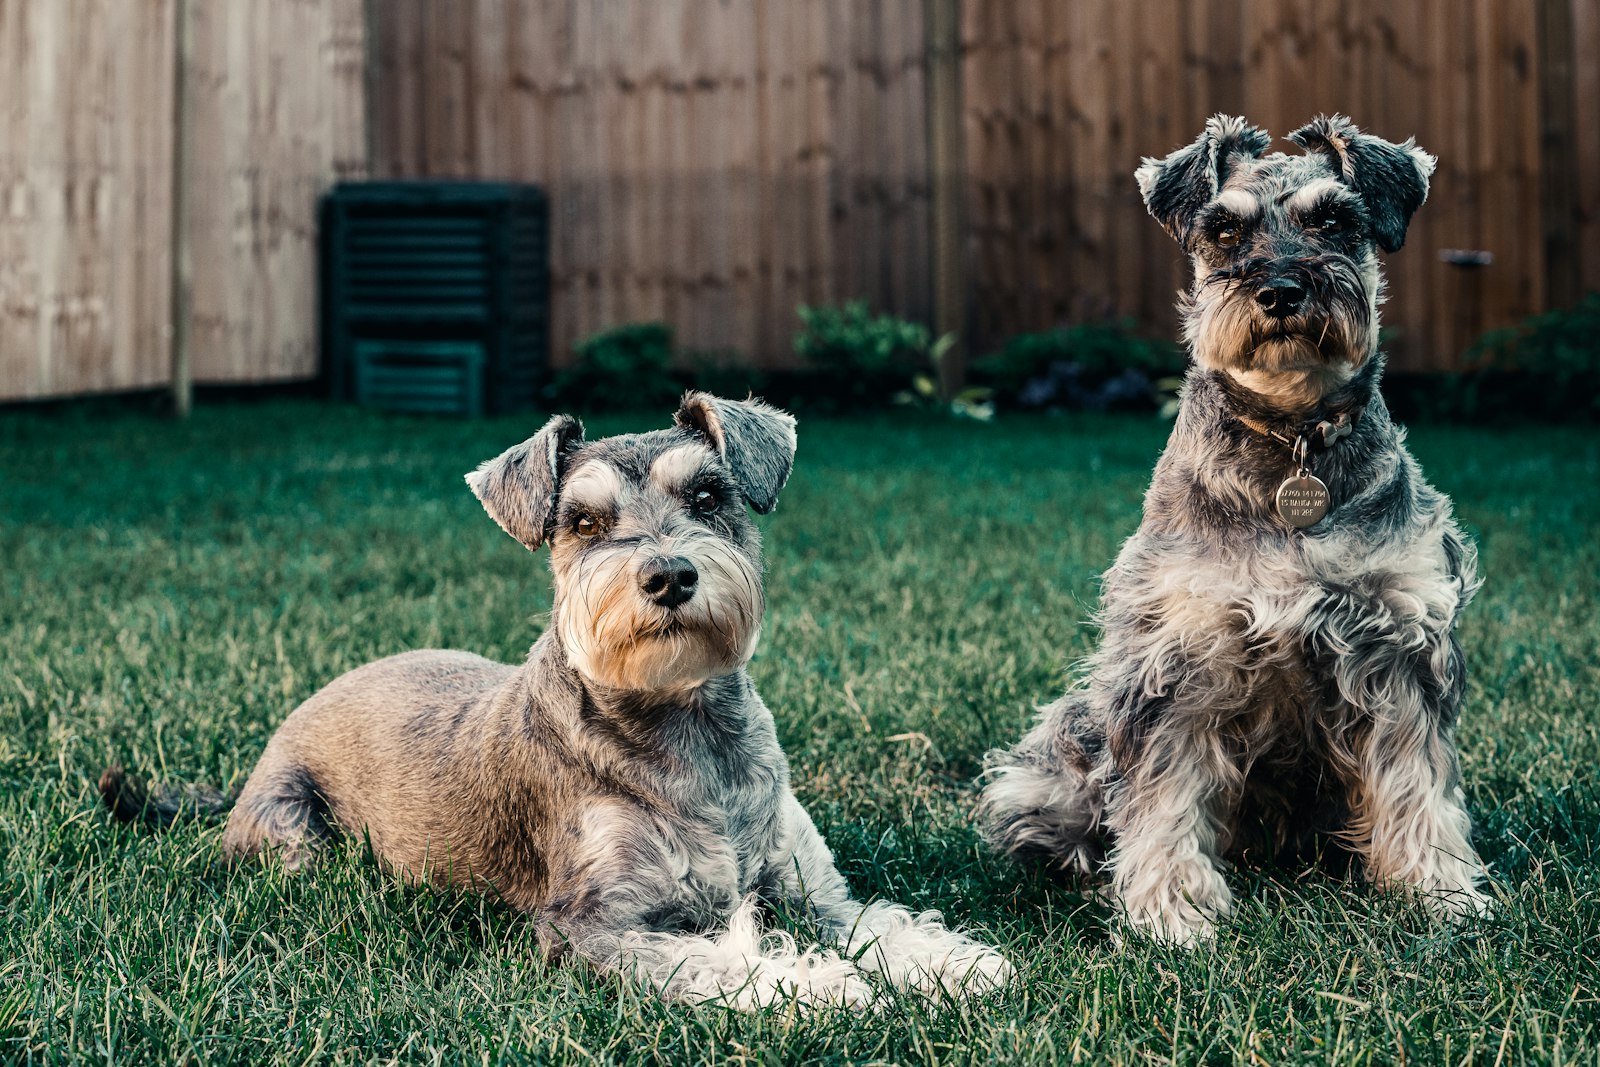 Sony a7R III sample photo. Two long-coated gray dogs photography